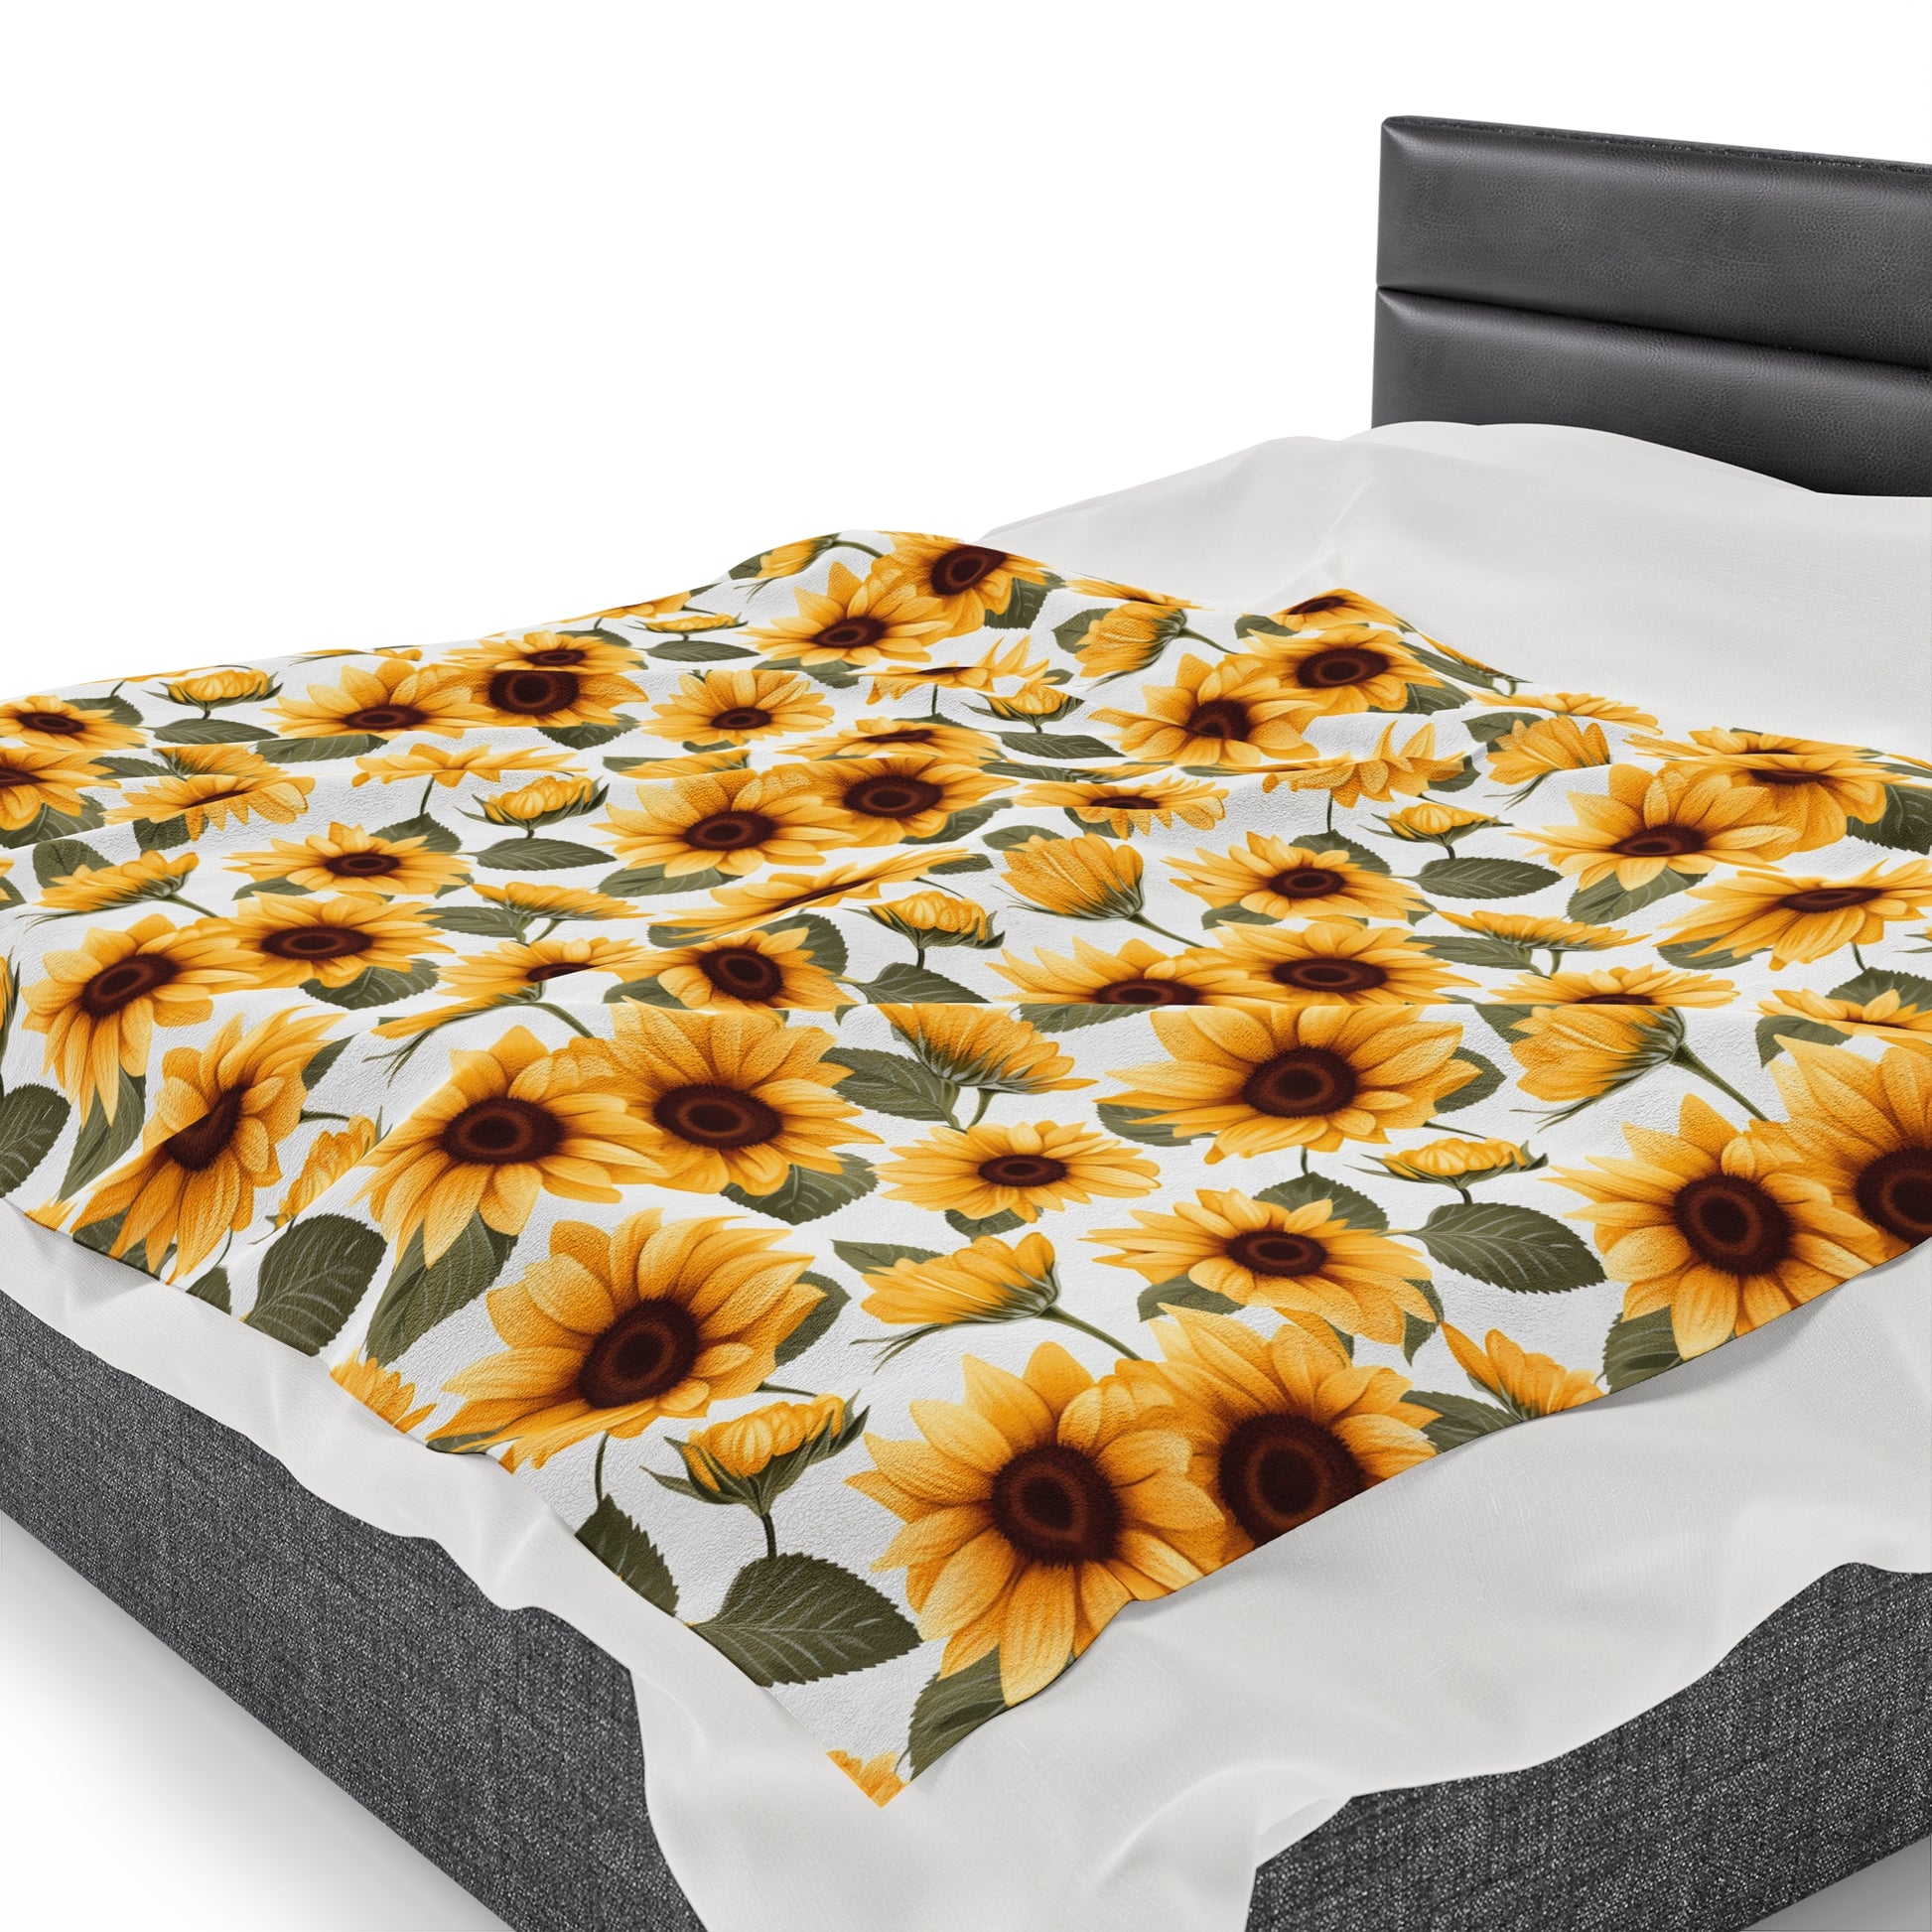 Sunflower Fleece Throw Blanket, White Yellow Flowers Velveteen Soft Plush Fluffy Cozy Warm Adult Kids Small Large Sofa Bed Décor Starcove Fashion